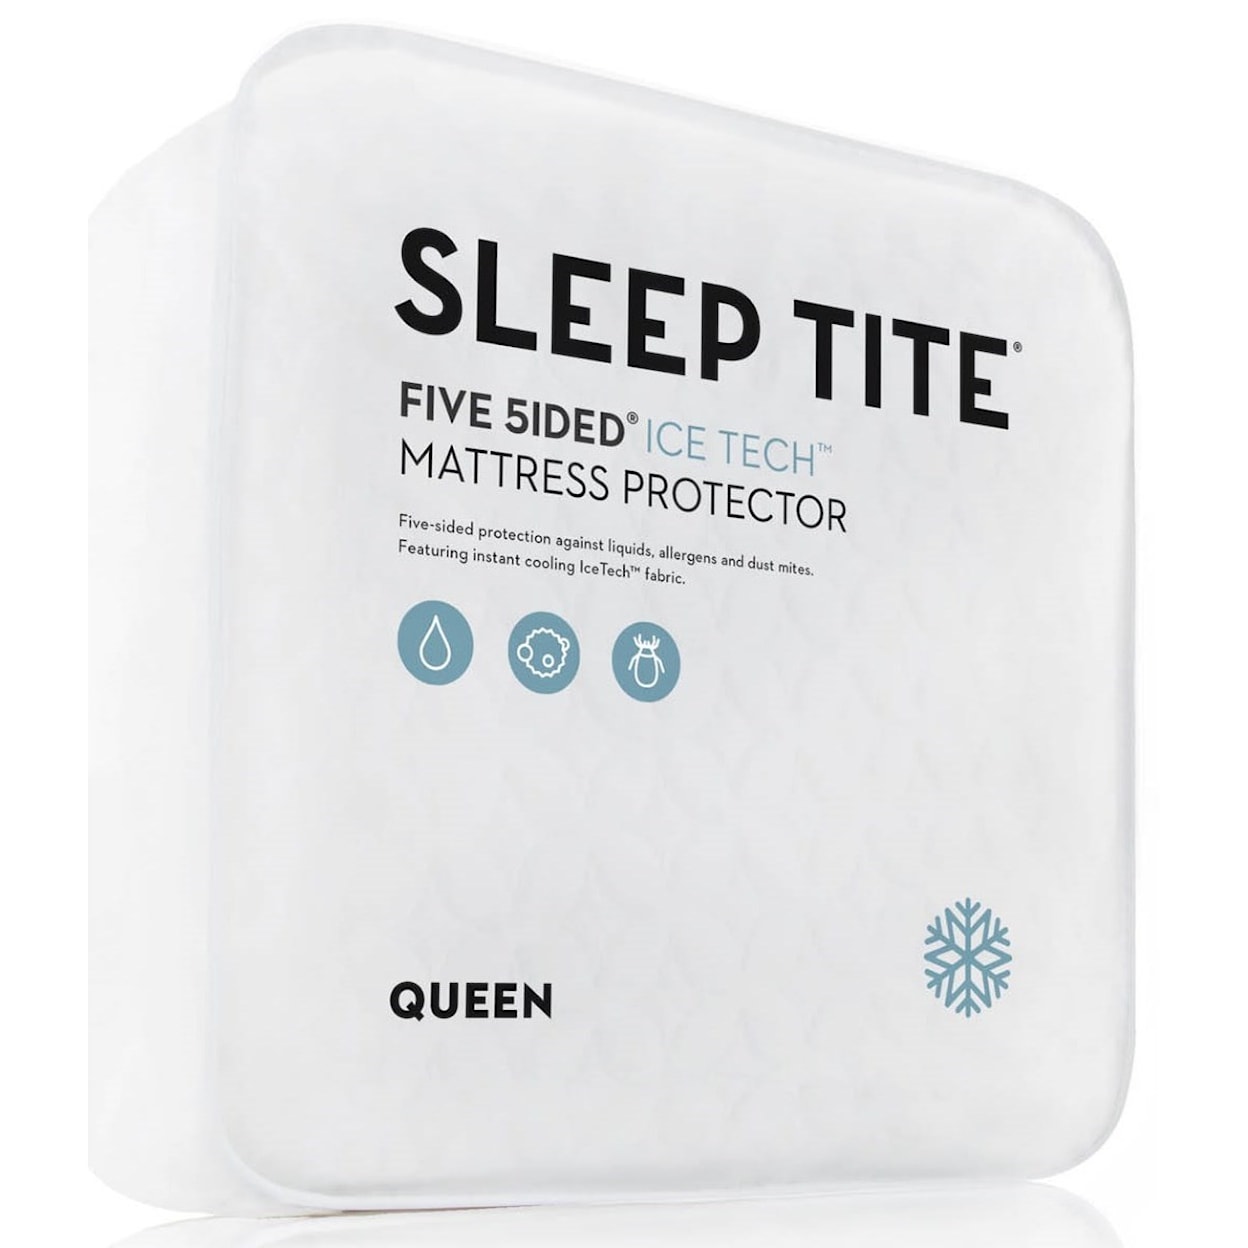 Malouf Five 5ided IceTech Queen Five 5ided IceTech Mattress Protector